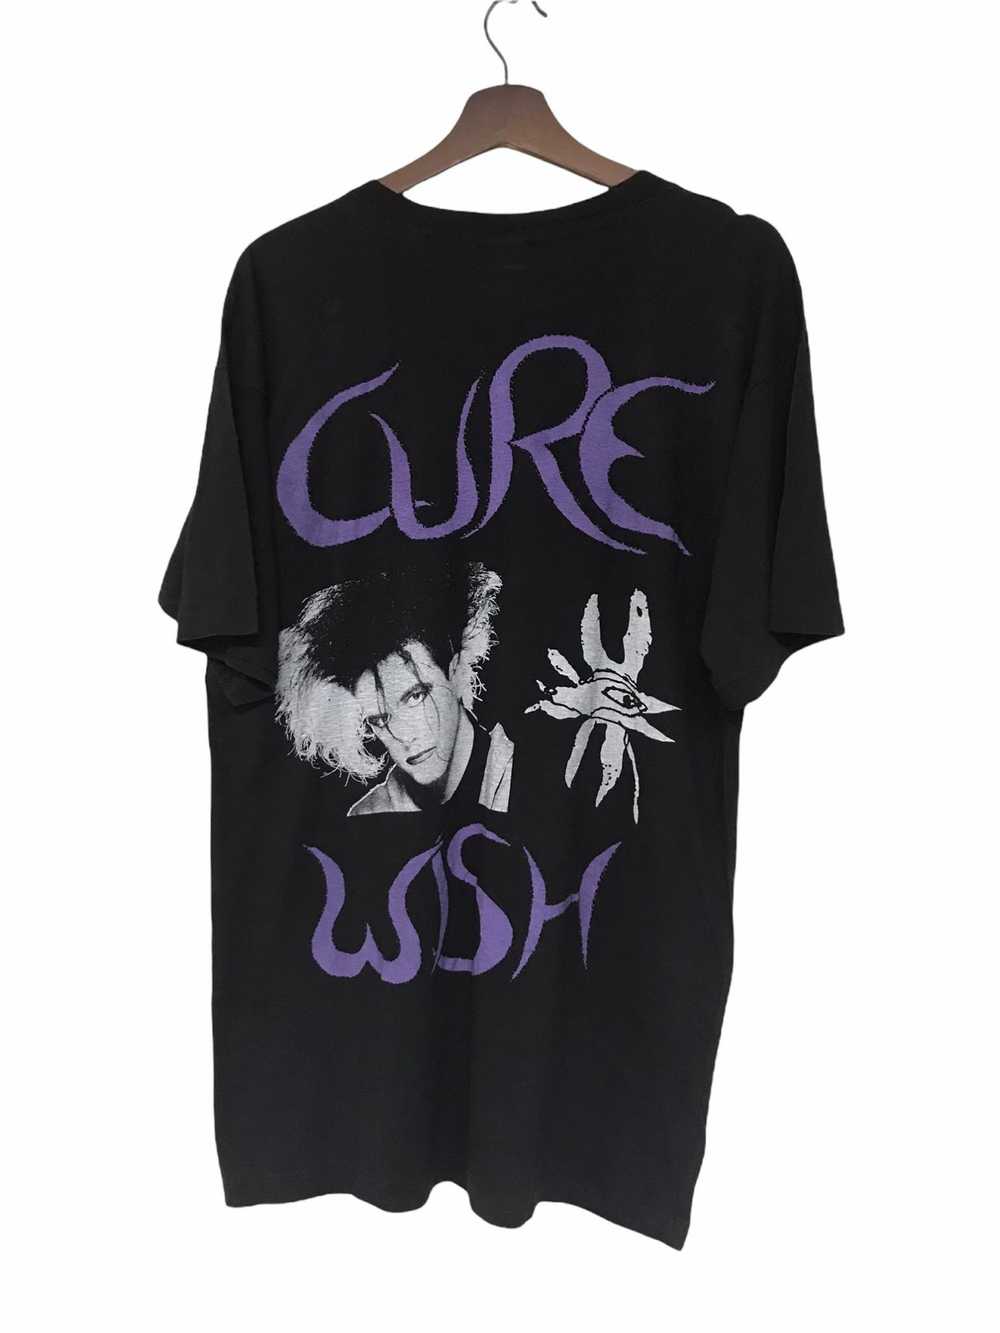 Vintage The Cure bootleg 90s t shirt - image 2